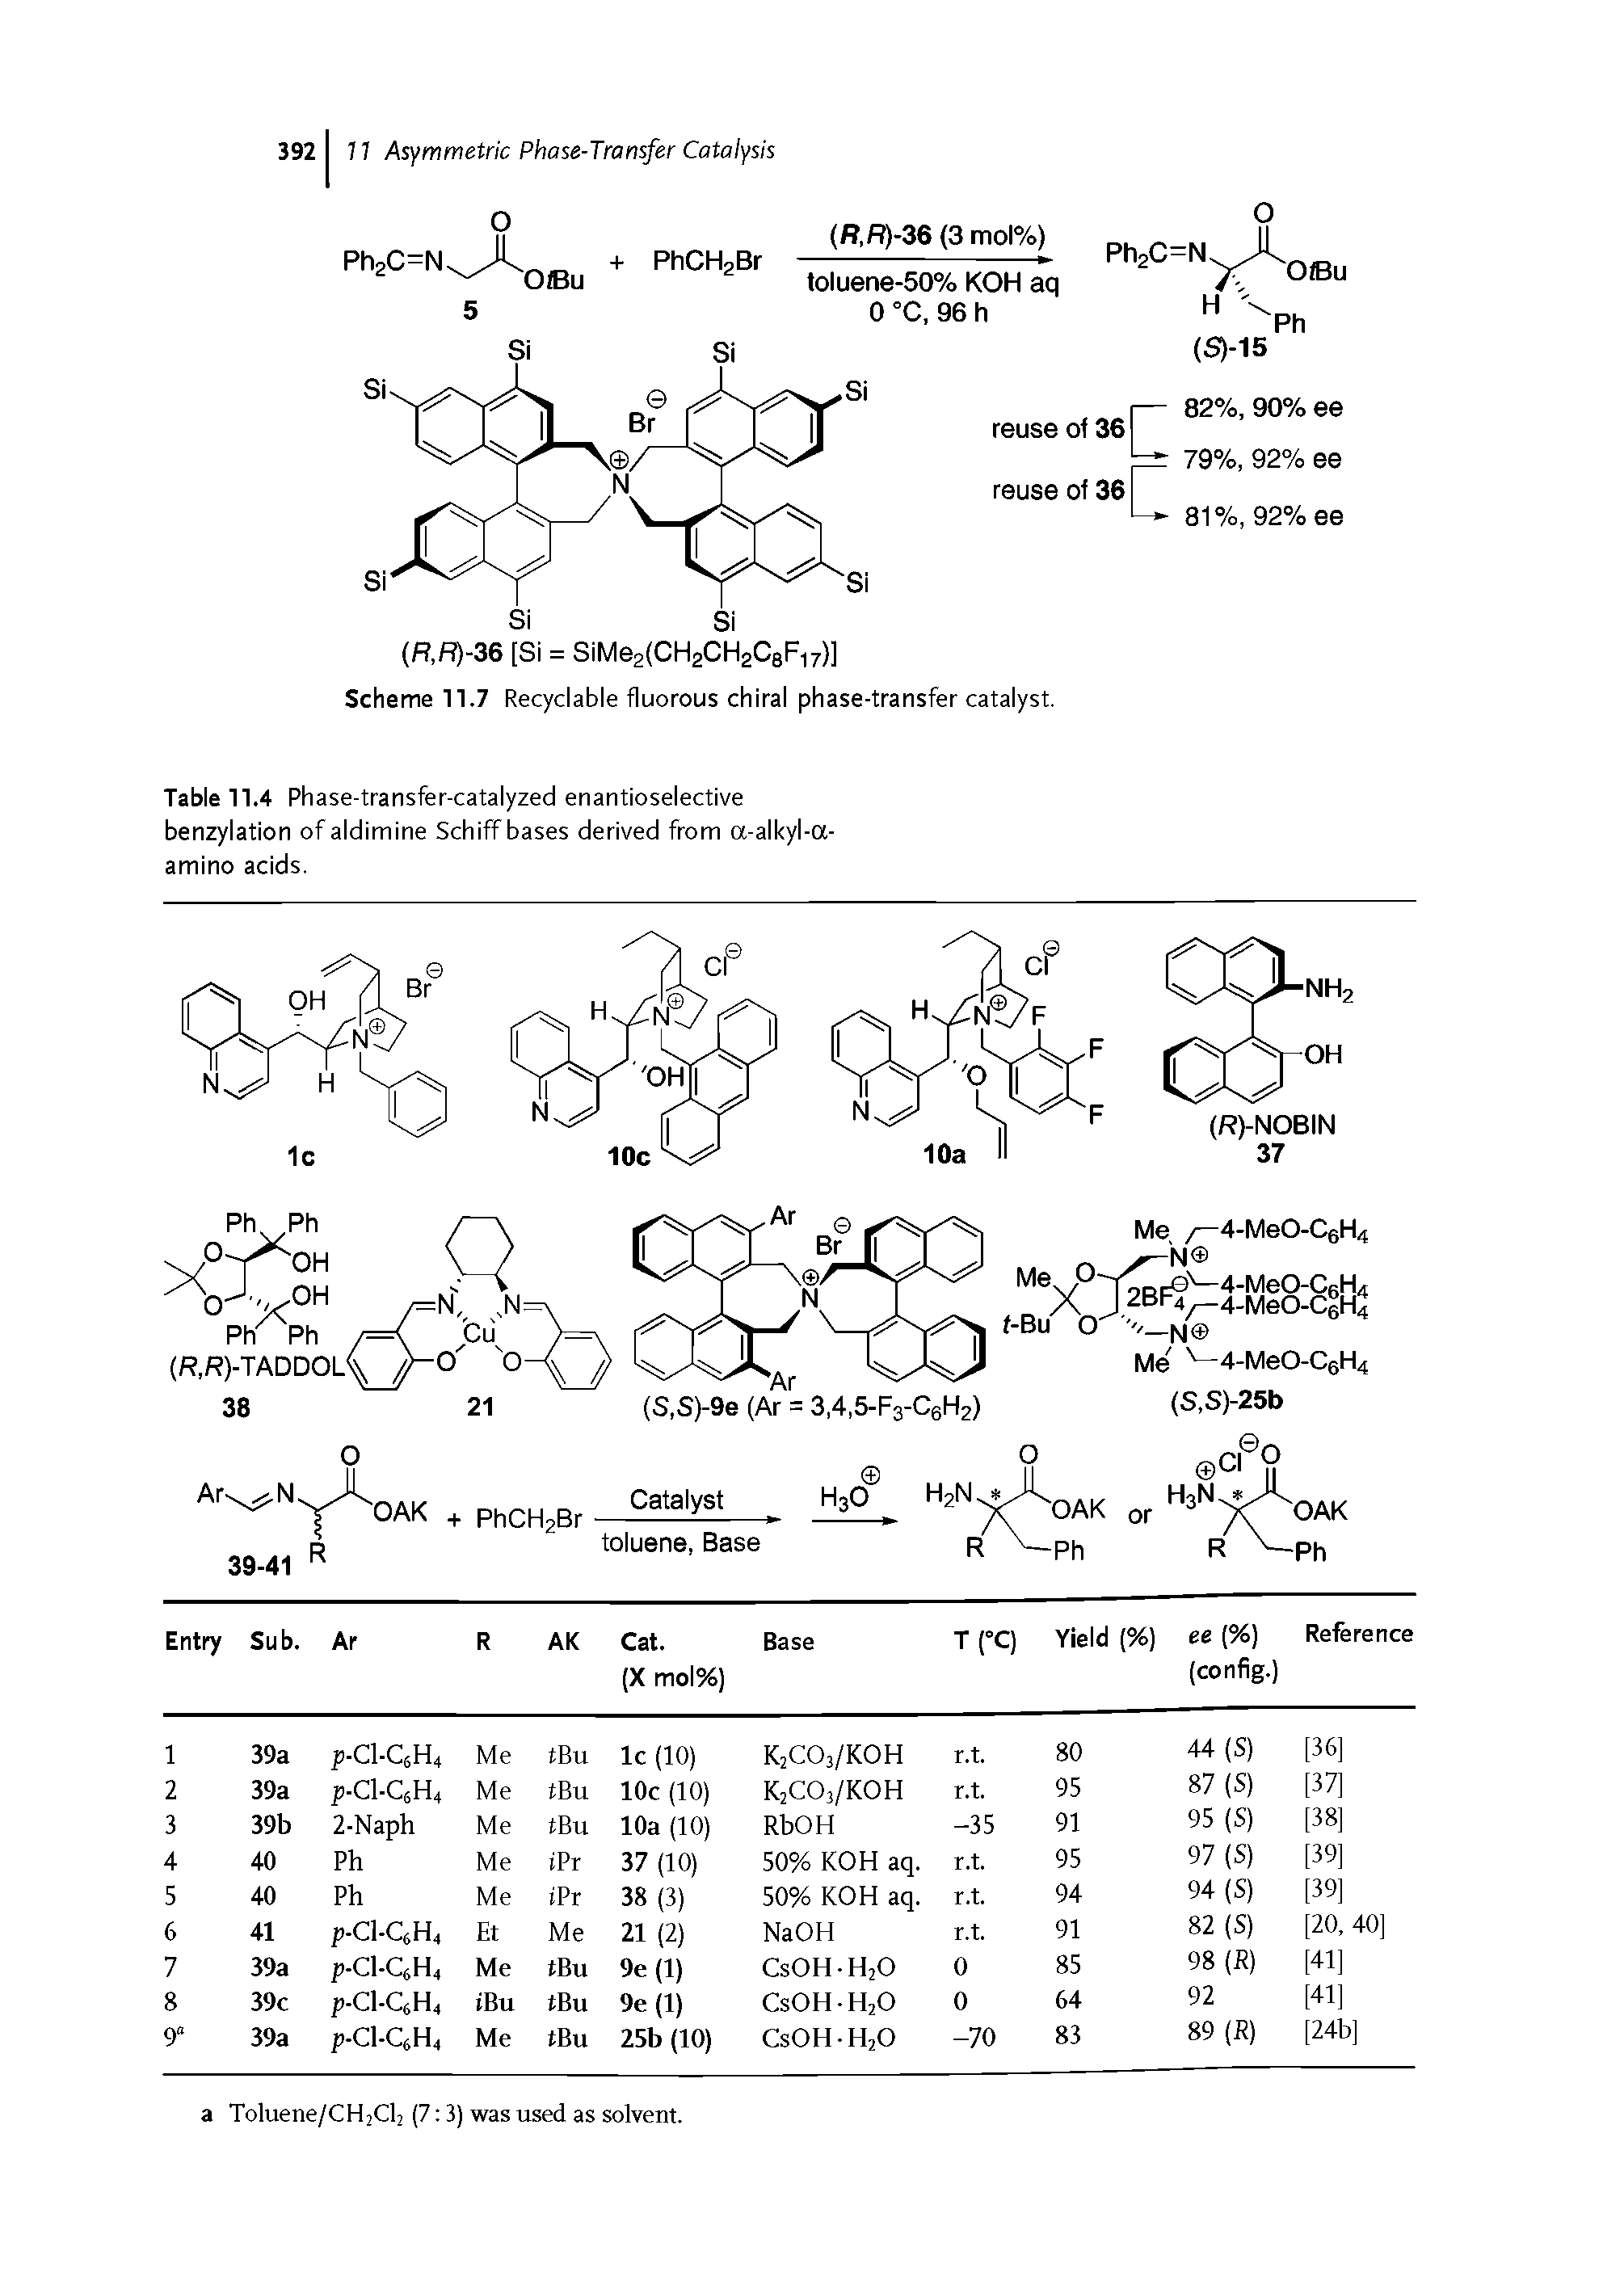 Scheme 11.7 Recyclable fluorous chiral phase-transfer catalyst.